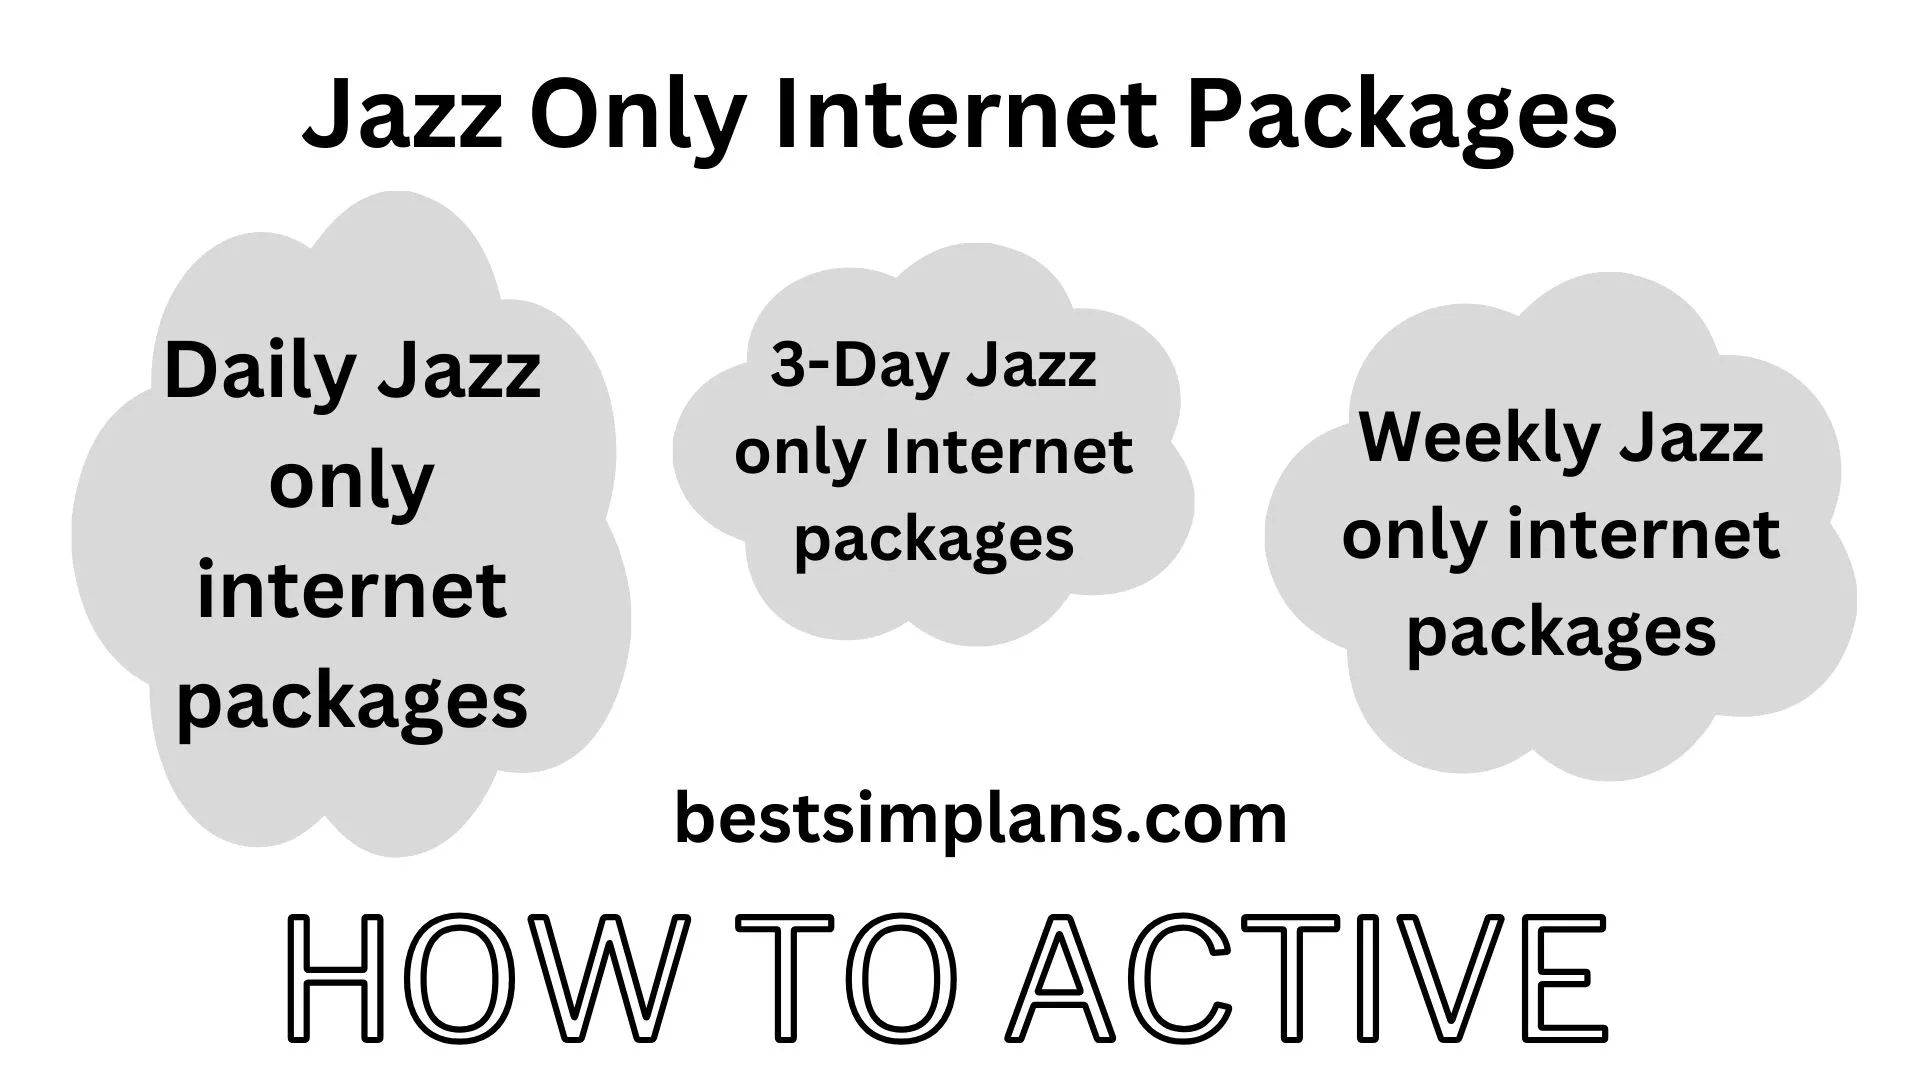 Jazz Only Internet Packages in 10GB: Daily, 3-Day, Weekly, and Monthly